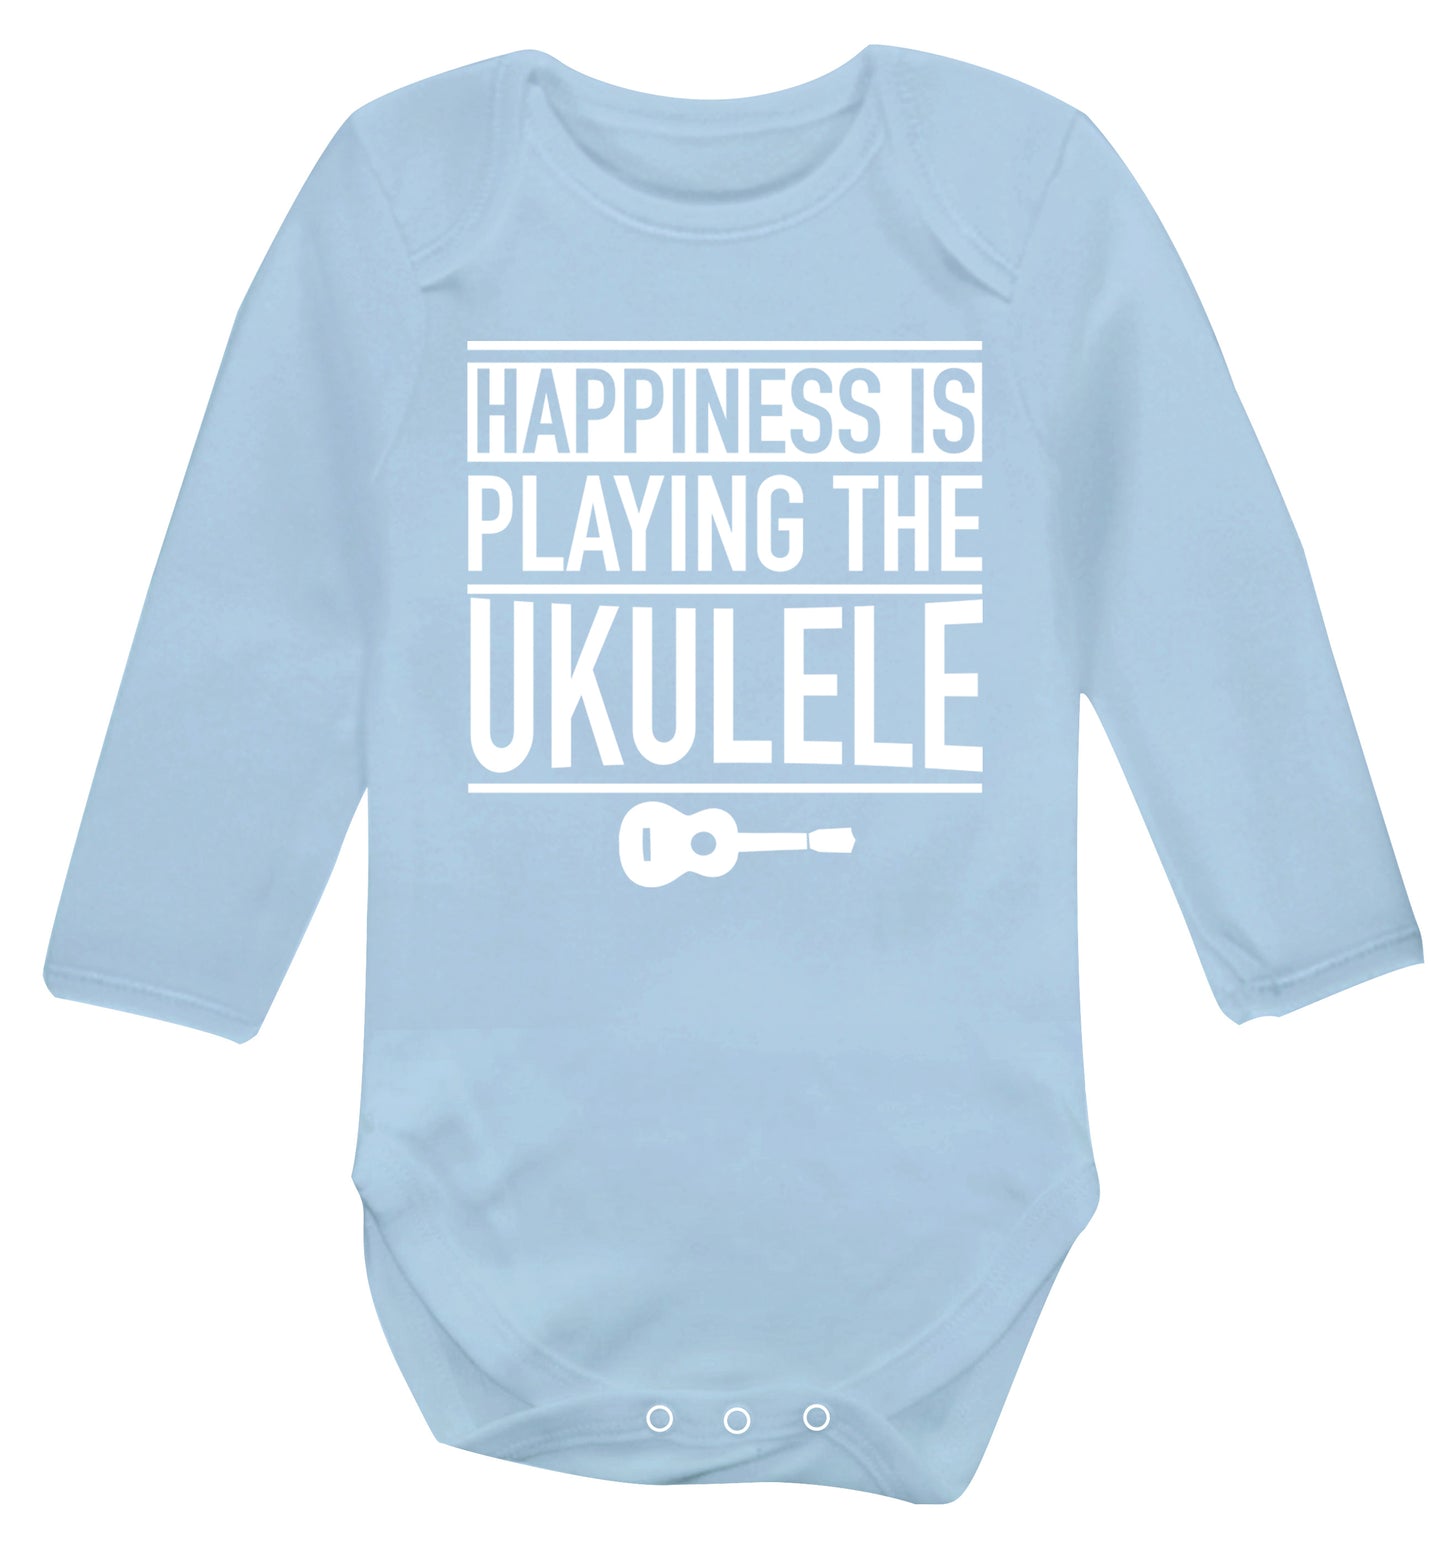 Happines is playing the ukulele Baby Vest long sleeved pale blue 6-12 months